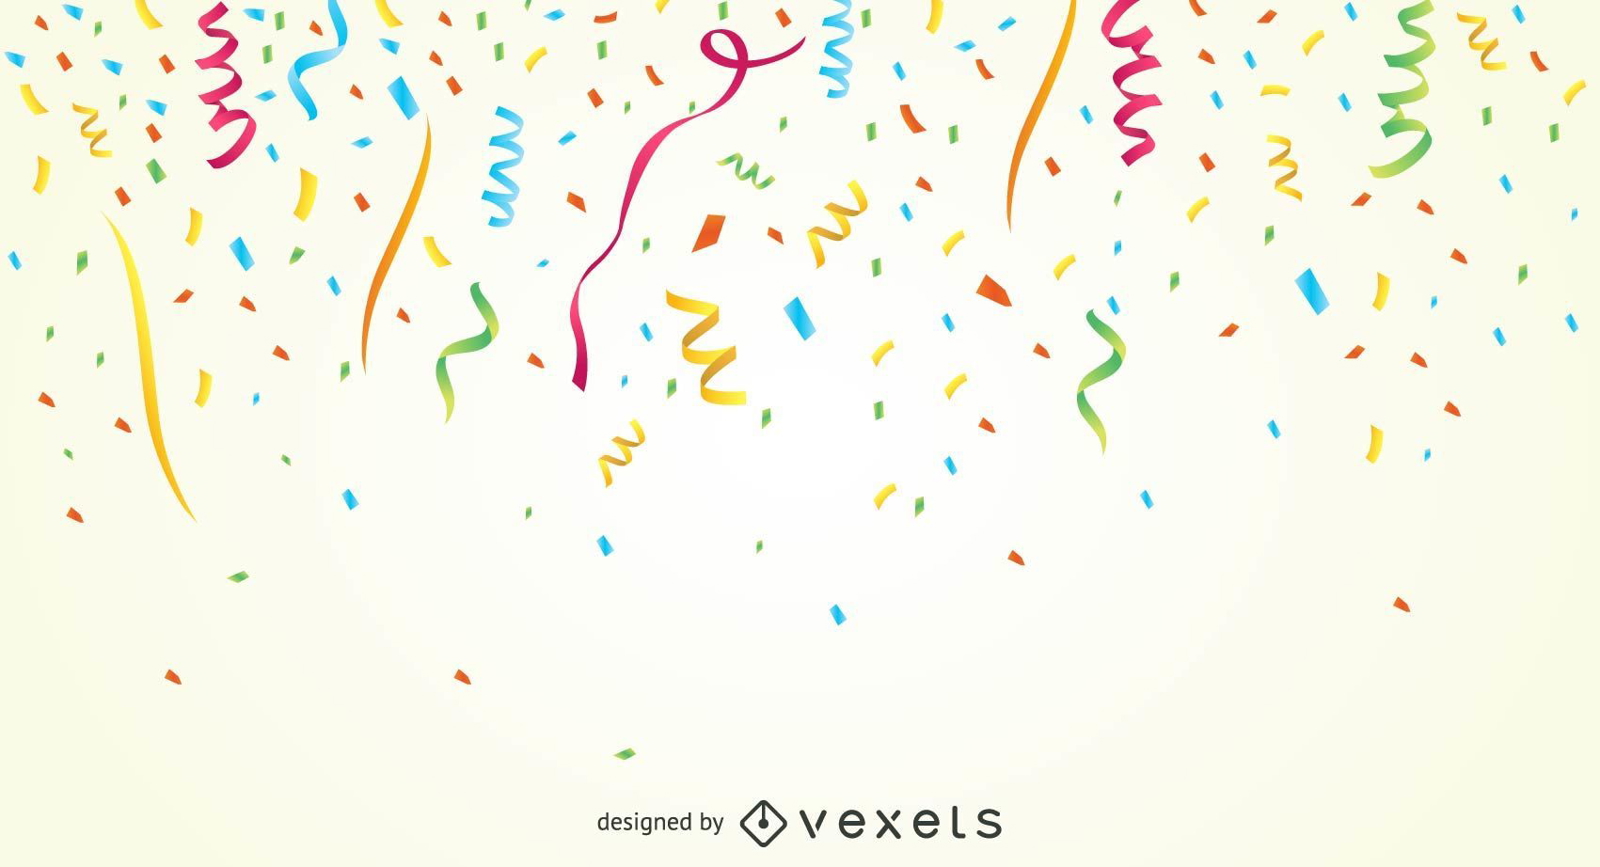 confetti background vector png